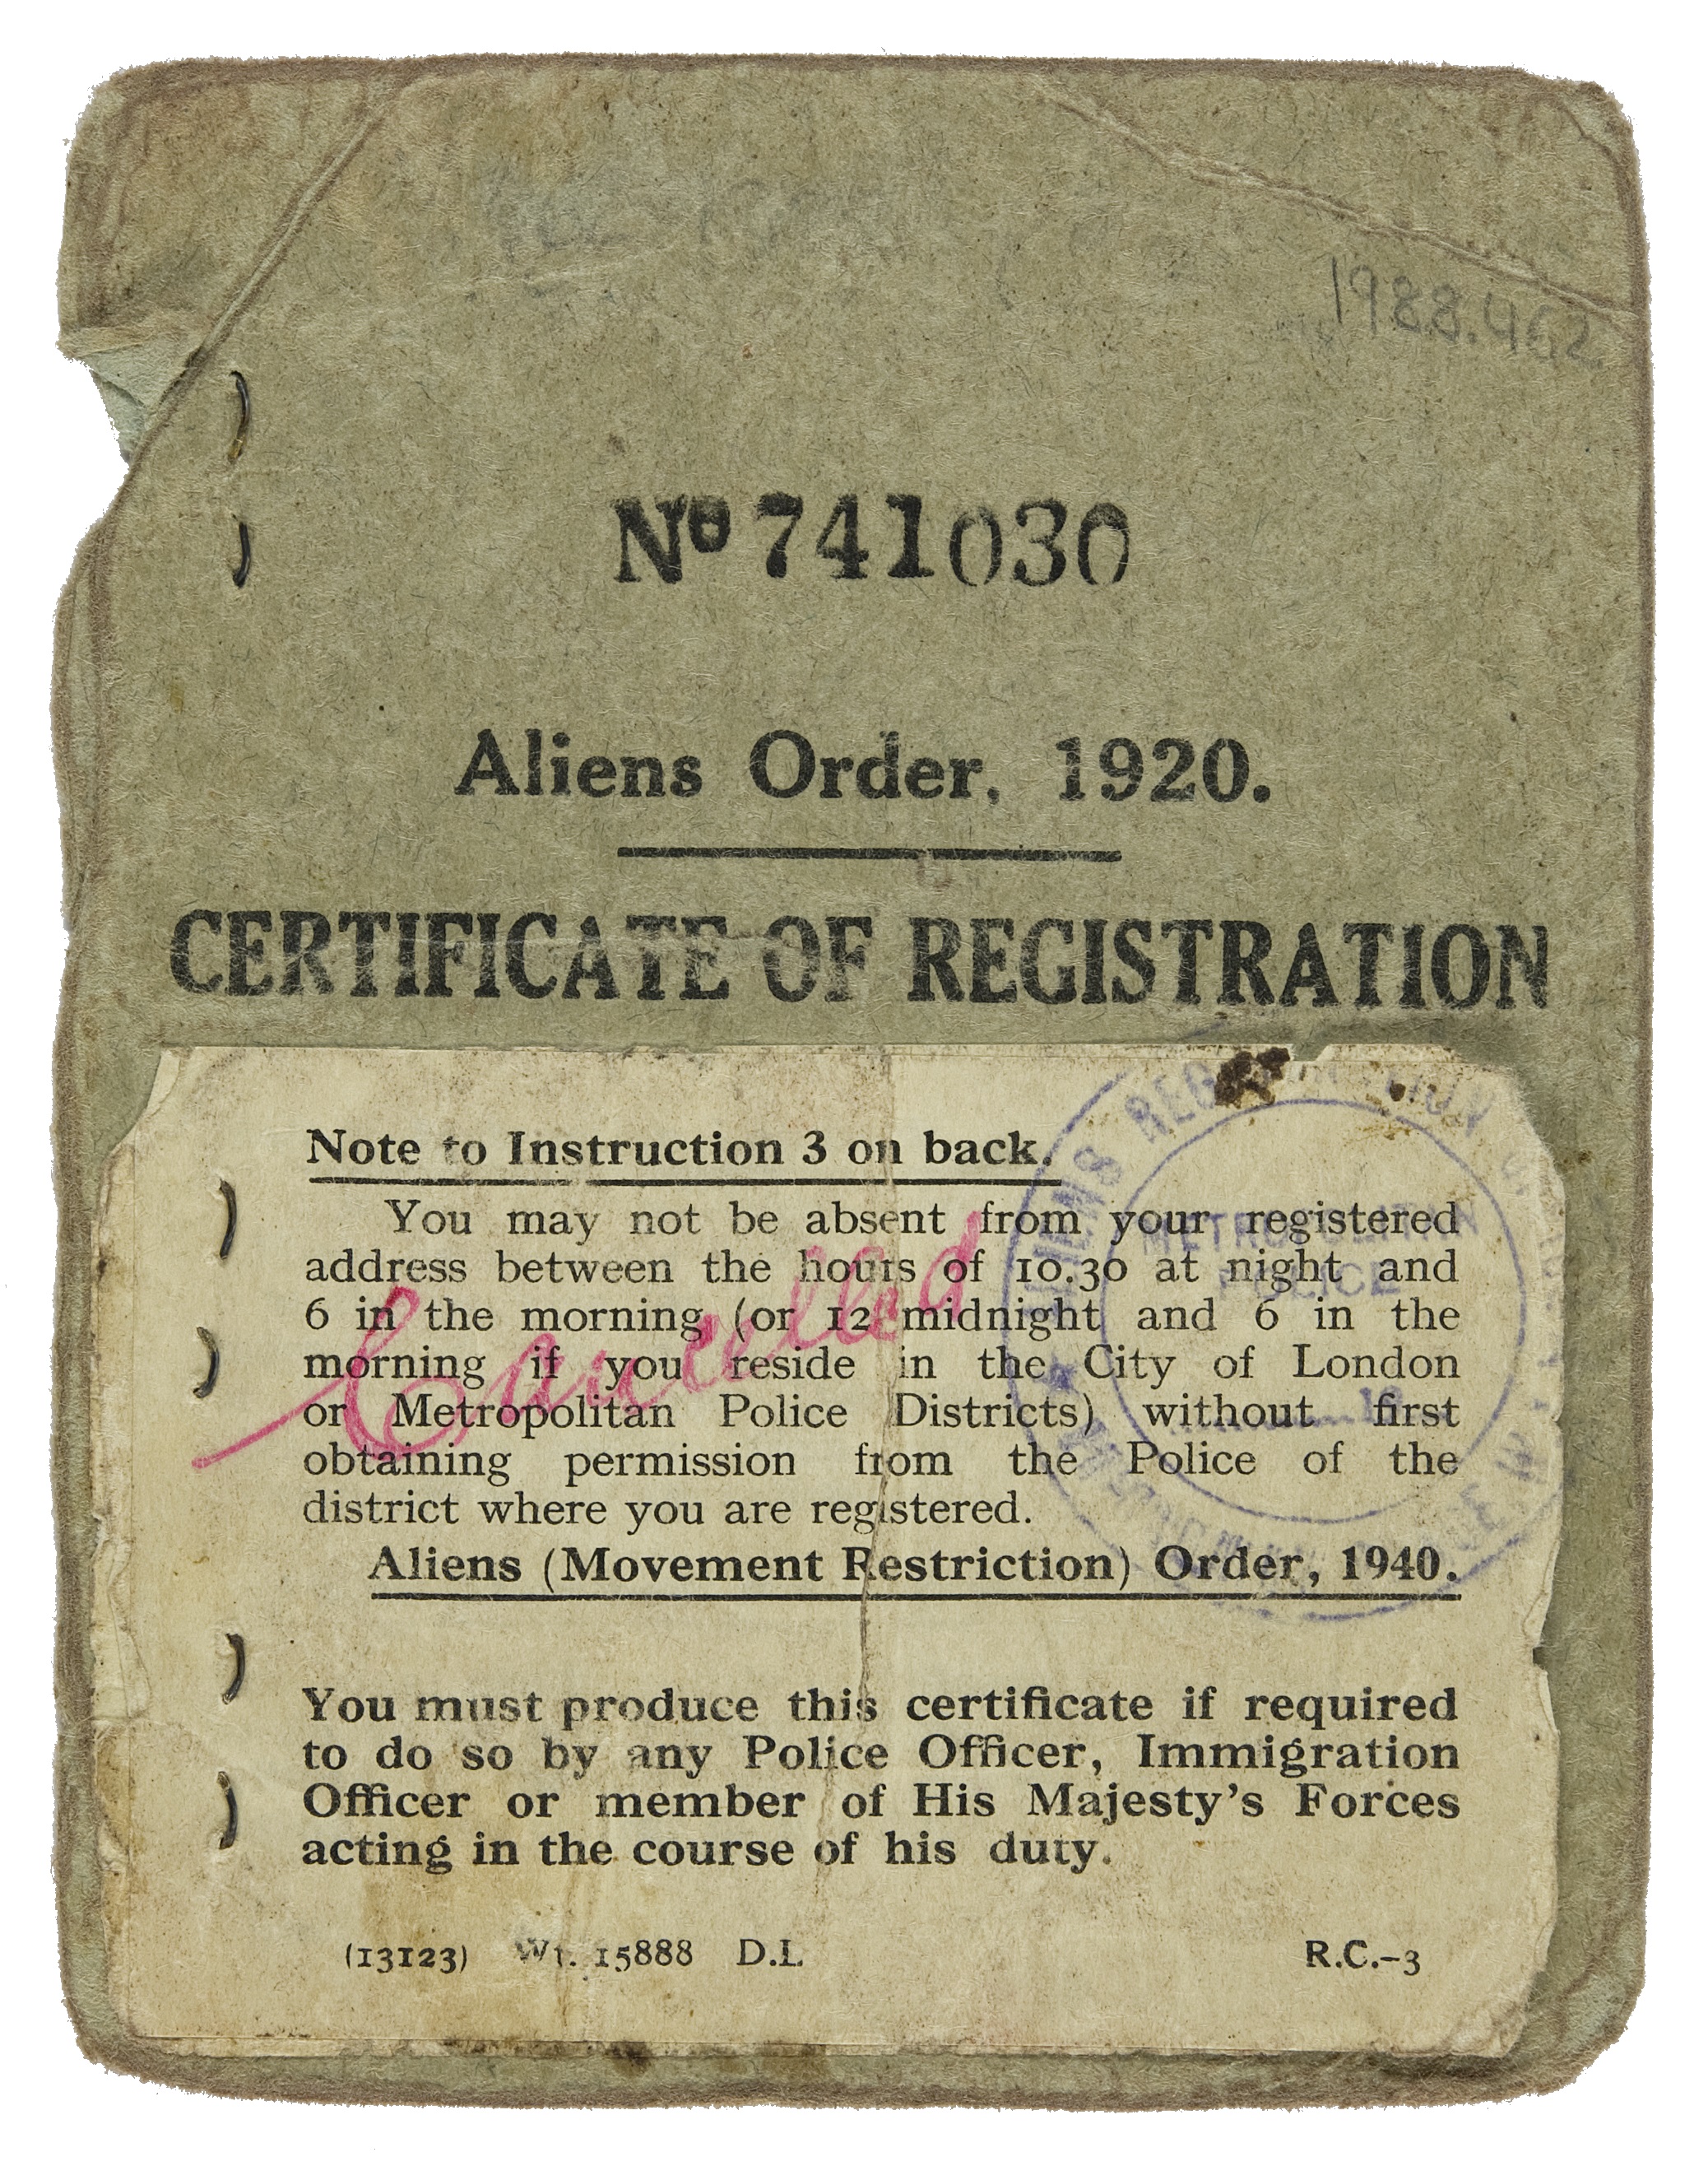 Certificate of Registration card for an immigrant